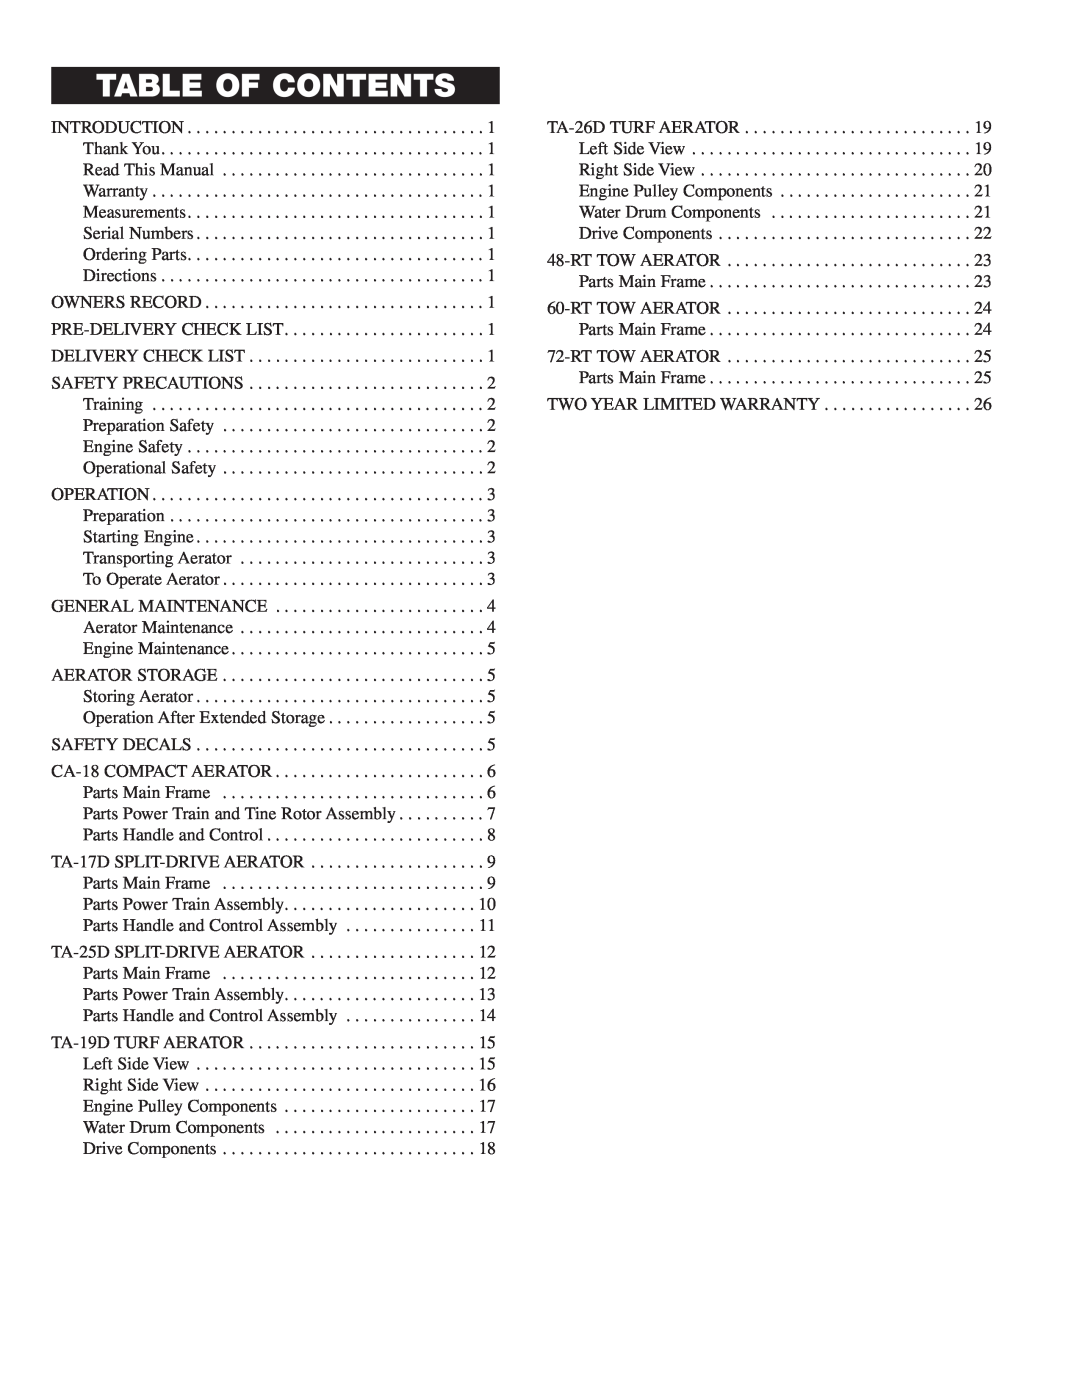 Classen 60-RT, TA-26D, TA-25D, TA-19D, TA-17D, CA-18, 72-RT, 48-RT manual Table Of Contents 